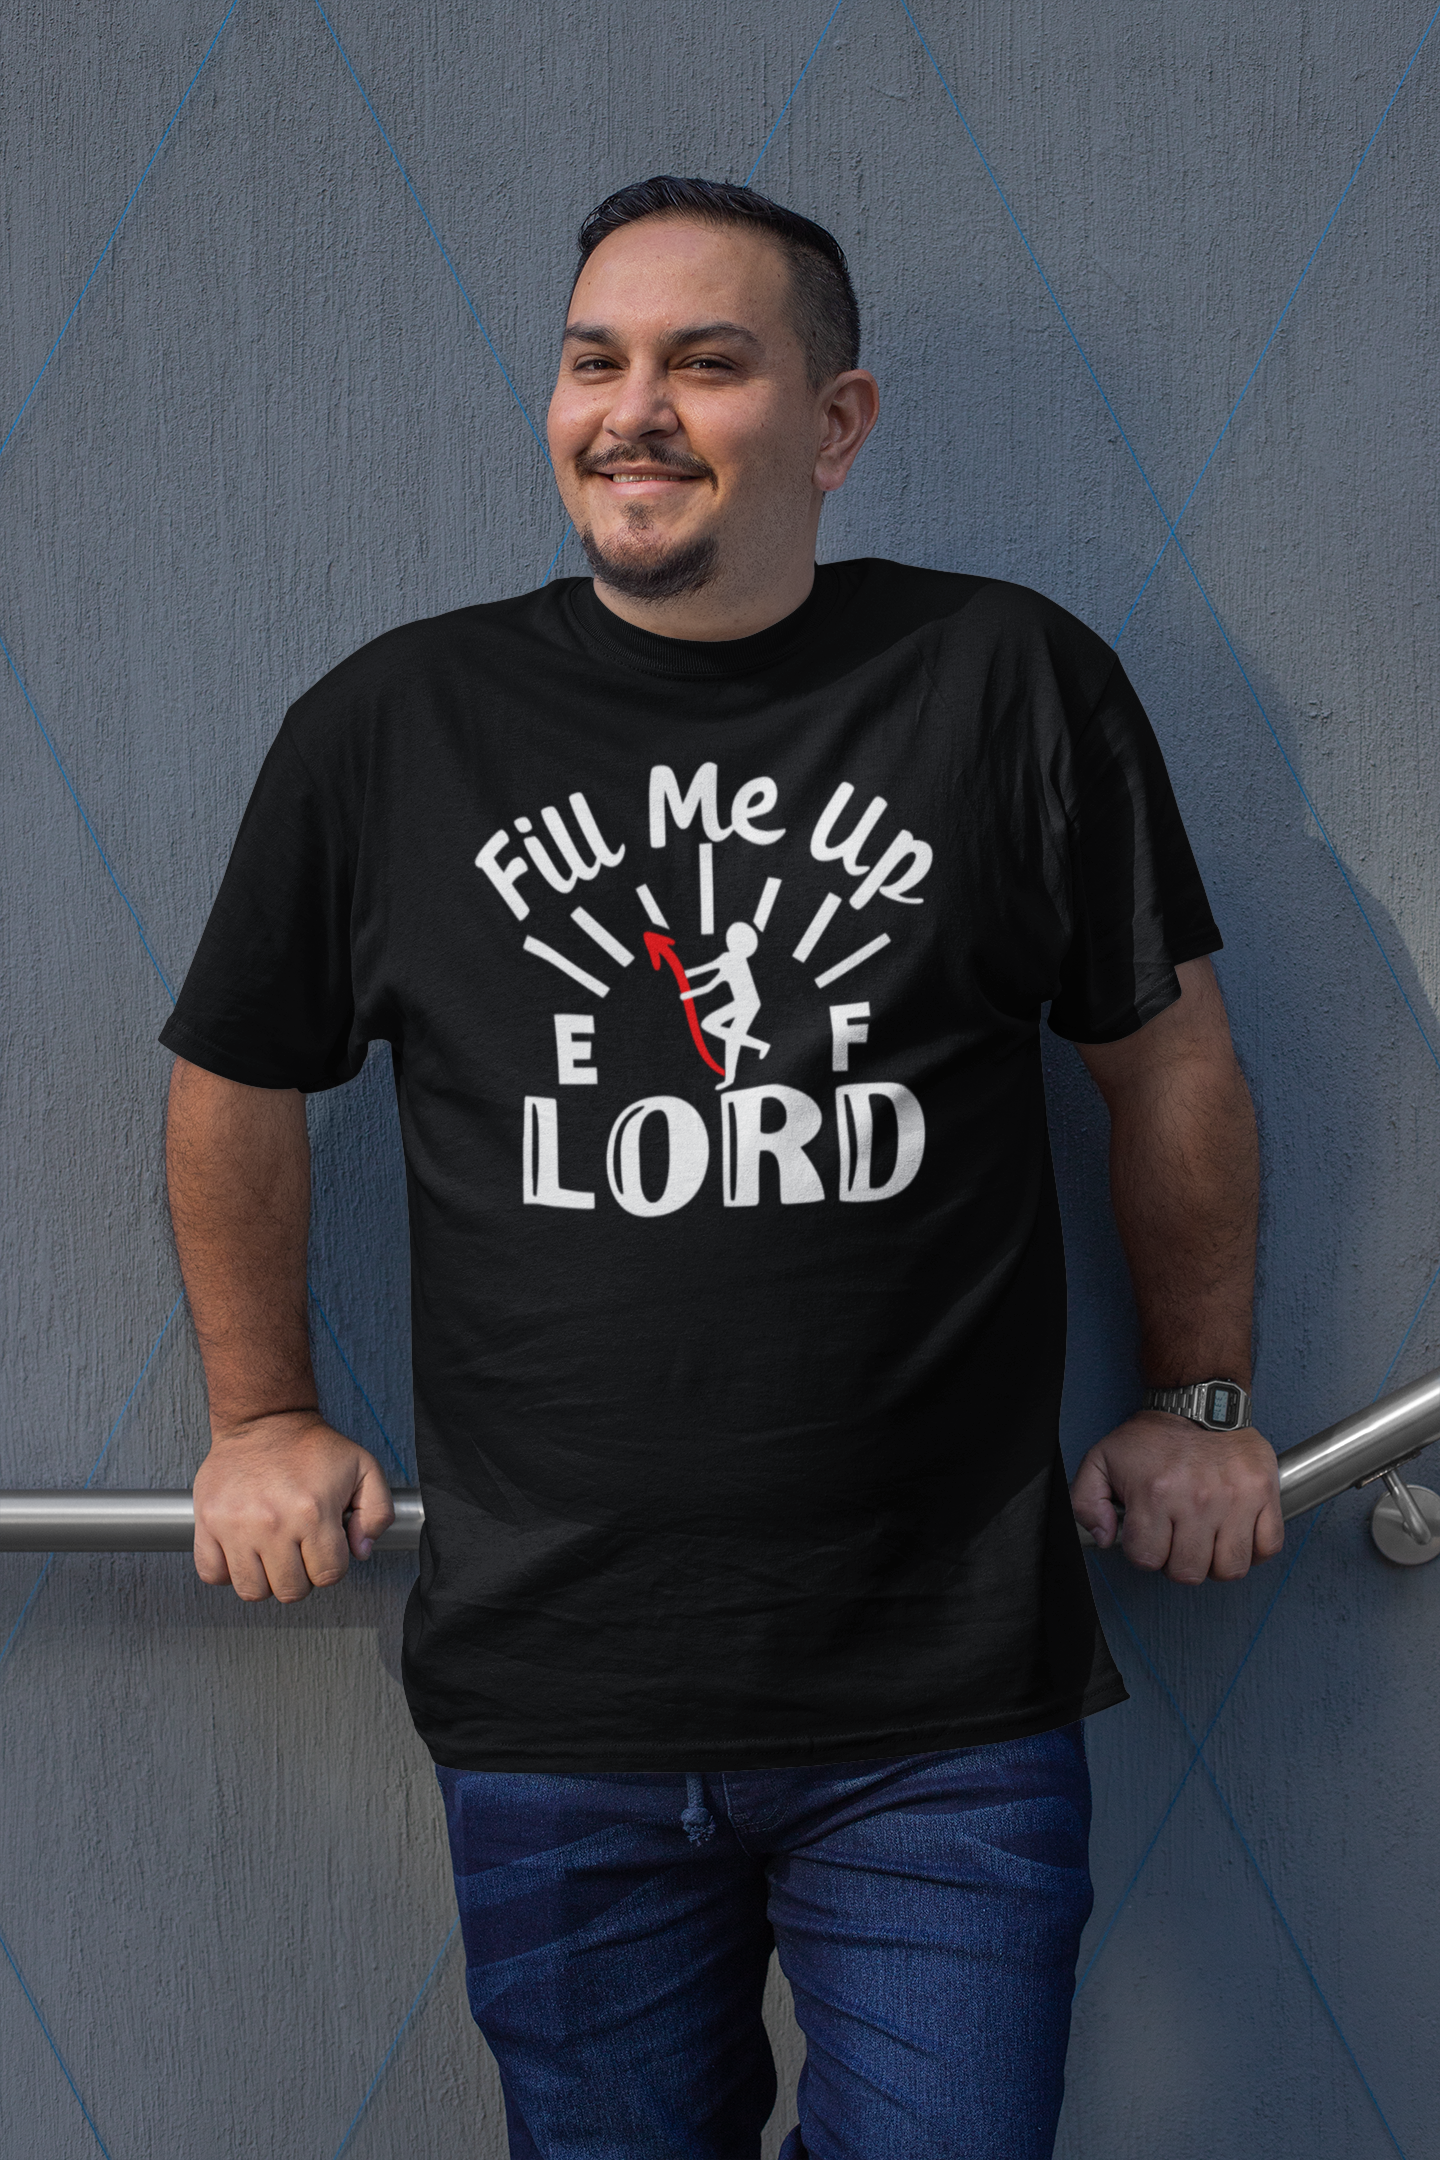 Fill me Up Lord - t-shirt